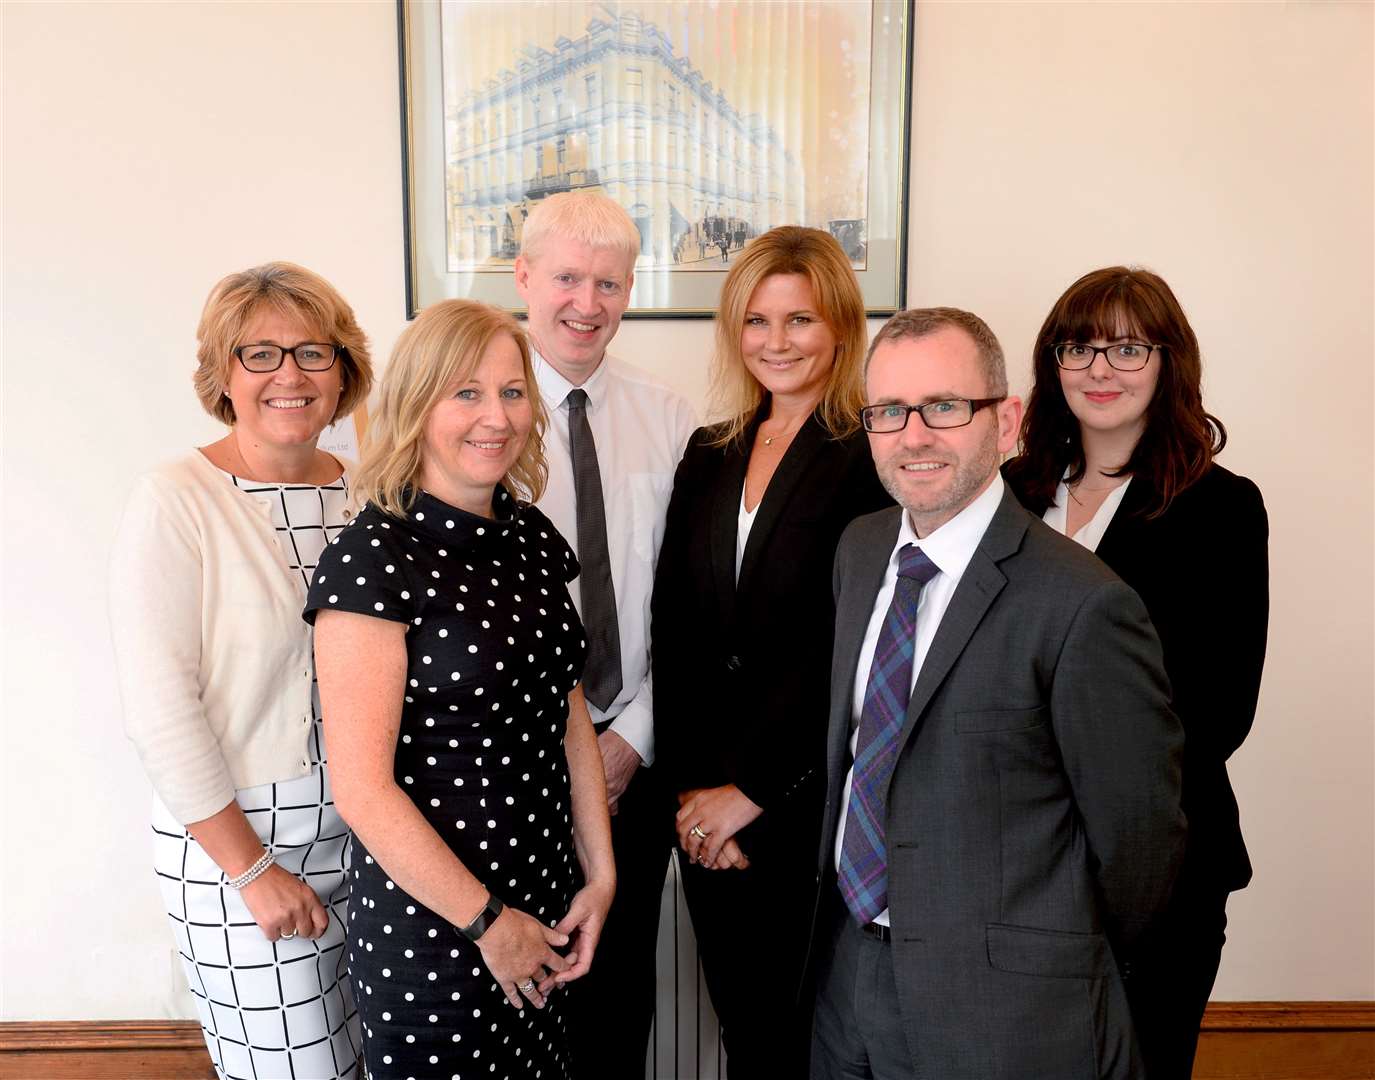 Macleod and MacCallum directors (from left) Morag MacIntosh, Alison Martin, Peter Mason, Lindsay Bishop, Graham Laughton and Katrina Ashbolt, who are sponsoring the brave child category at this year’s Highland Heroes awards. Photo: Gary Anthony/SPP